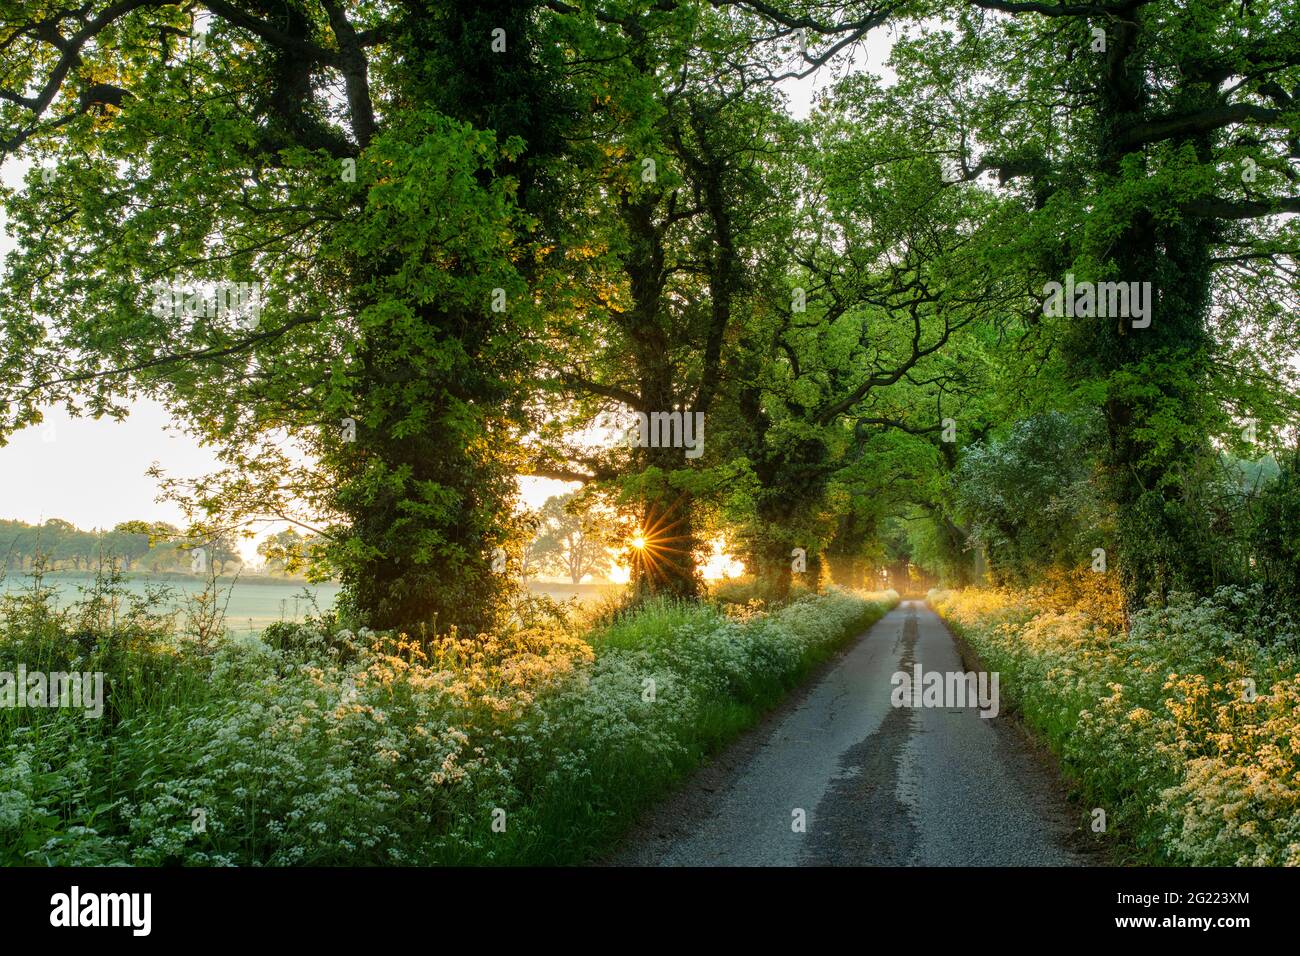 Country road in the english countryside at sunrise. Cropredy, Oxfordshire, England Stock Photo